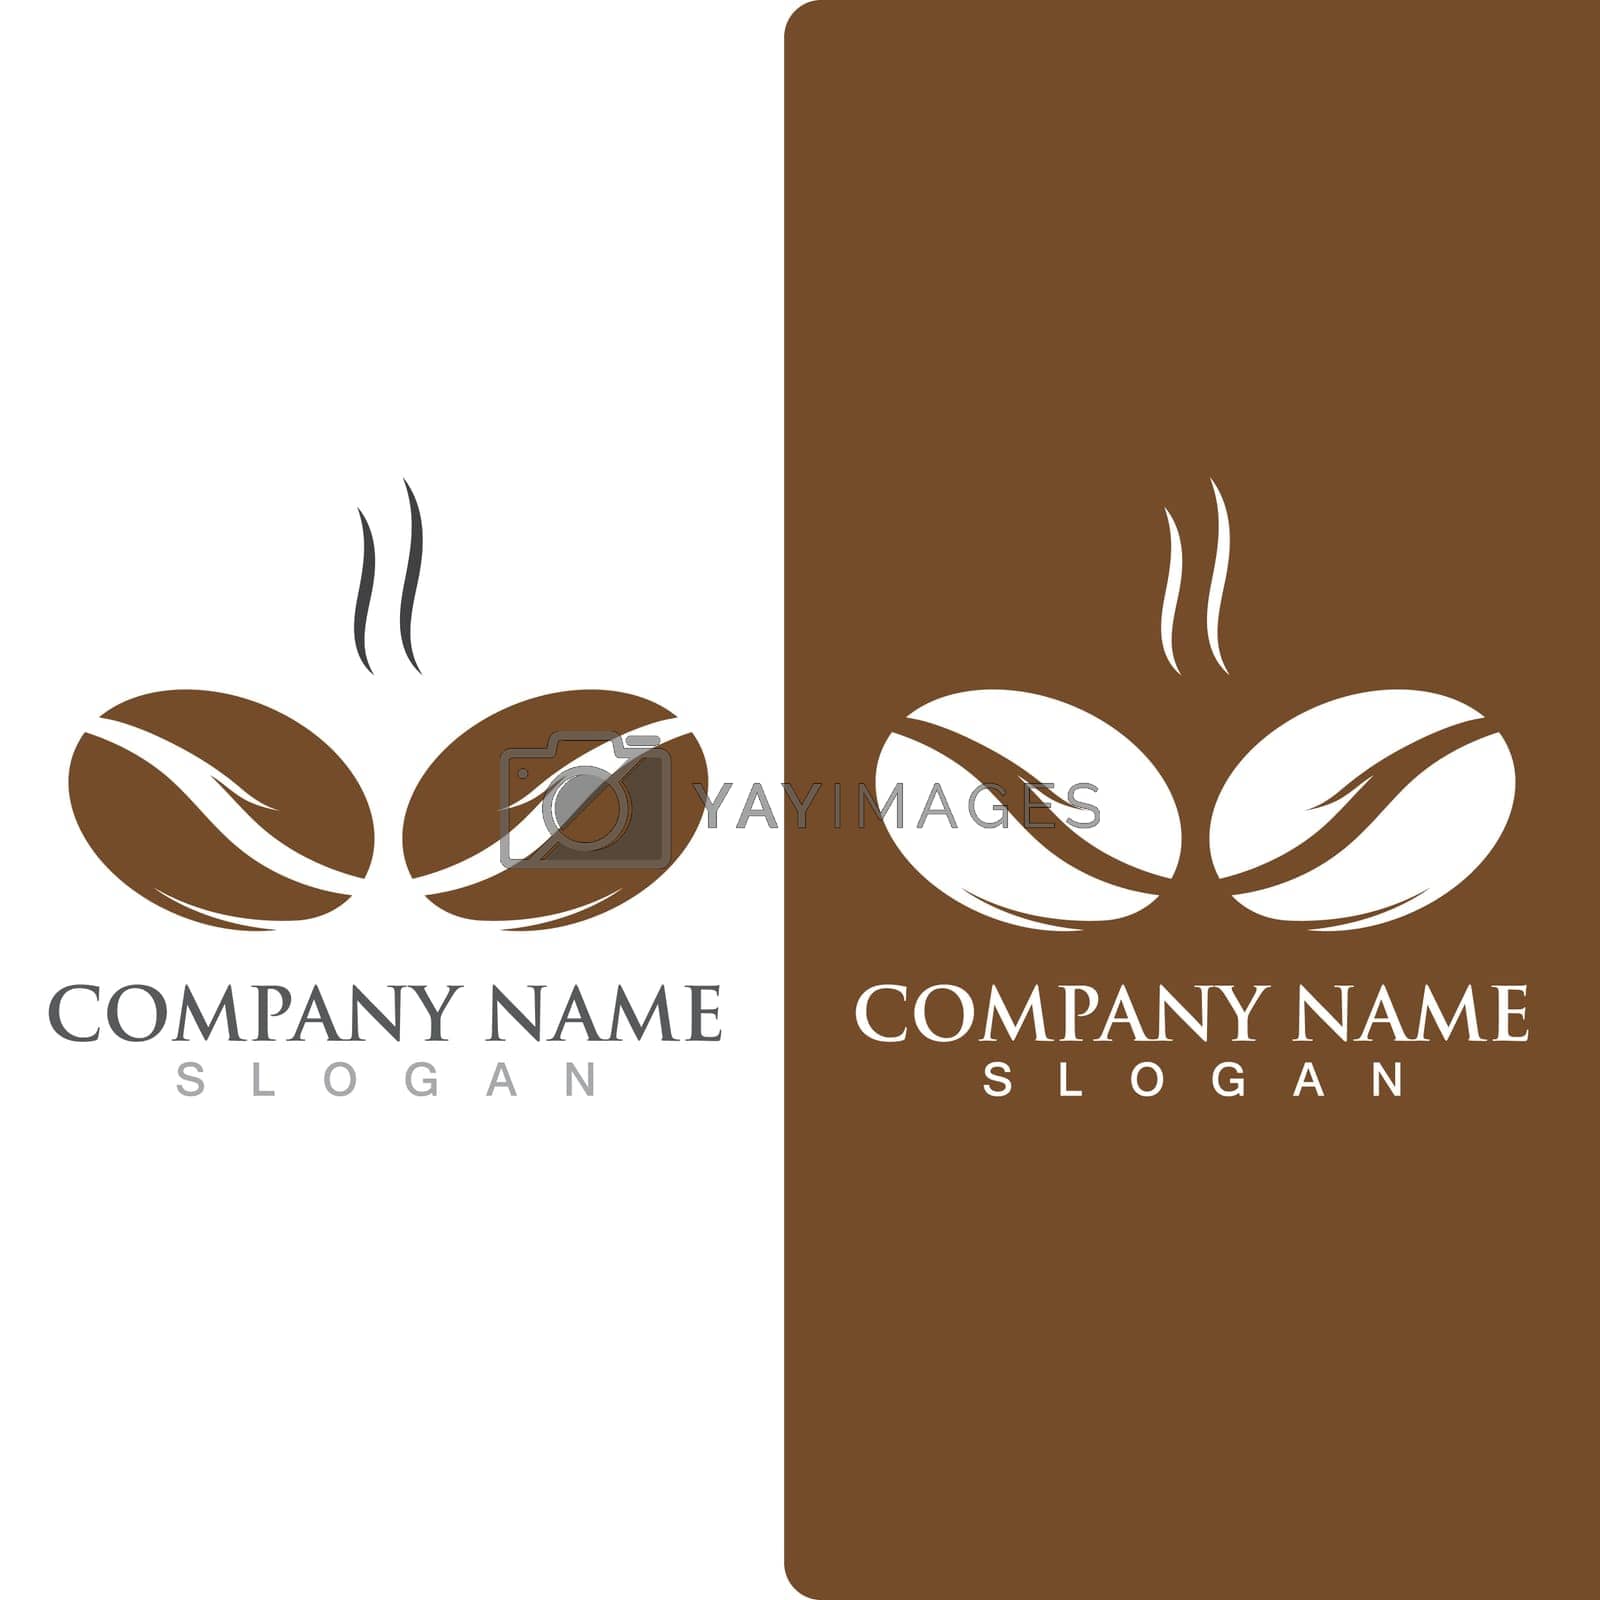 Royalty free image of coffee bean icon vector by Mrsongrphc